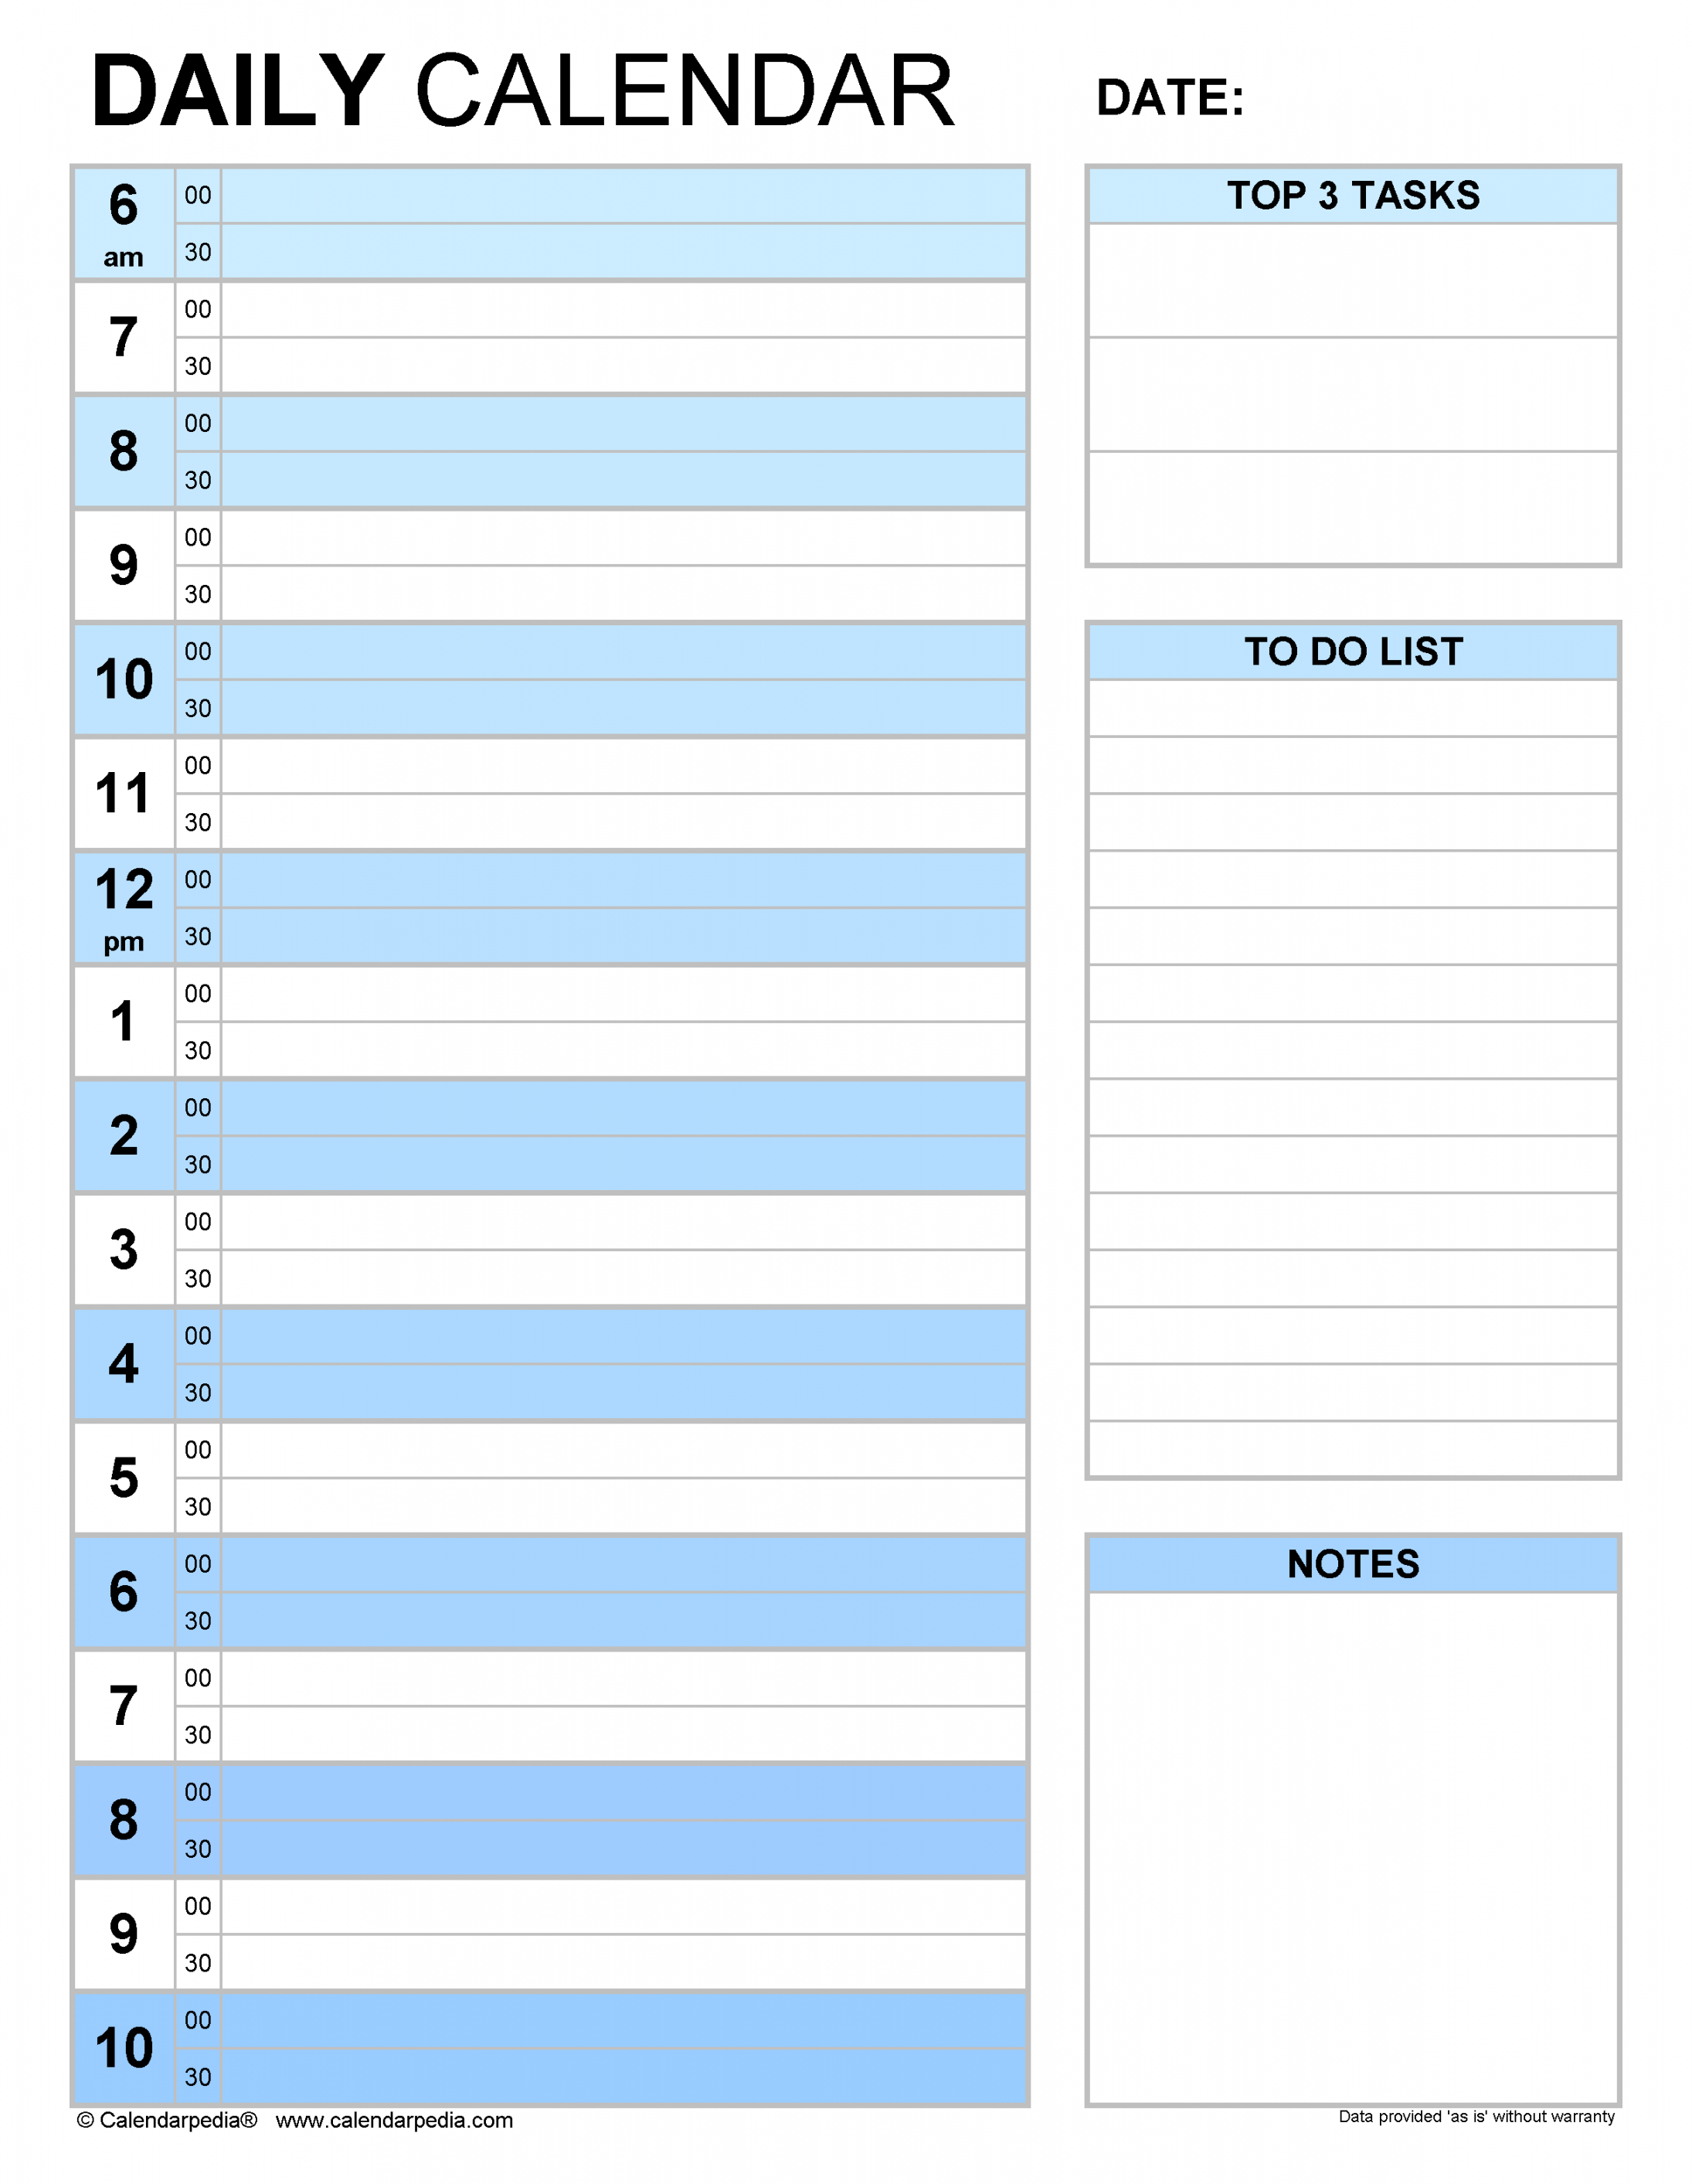 Free daily calendars in PDF format - + templates